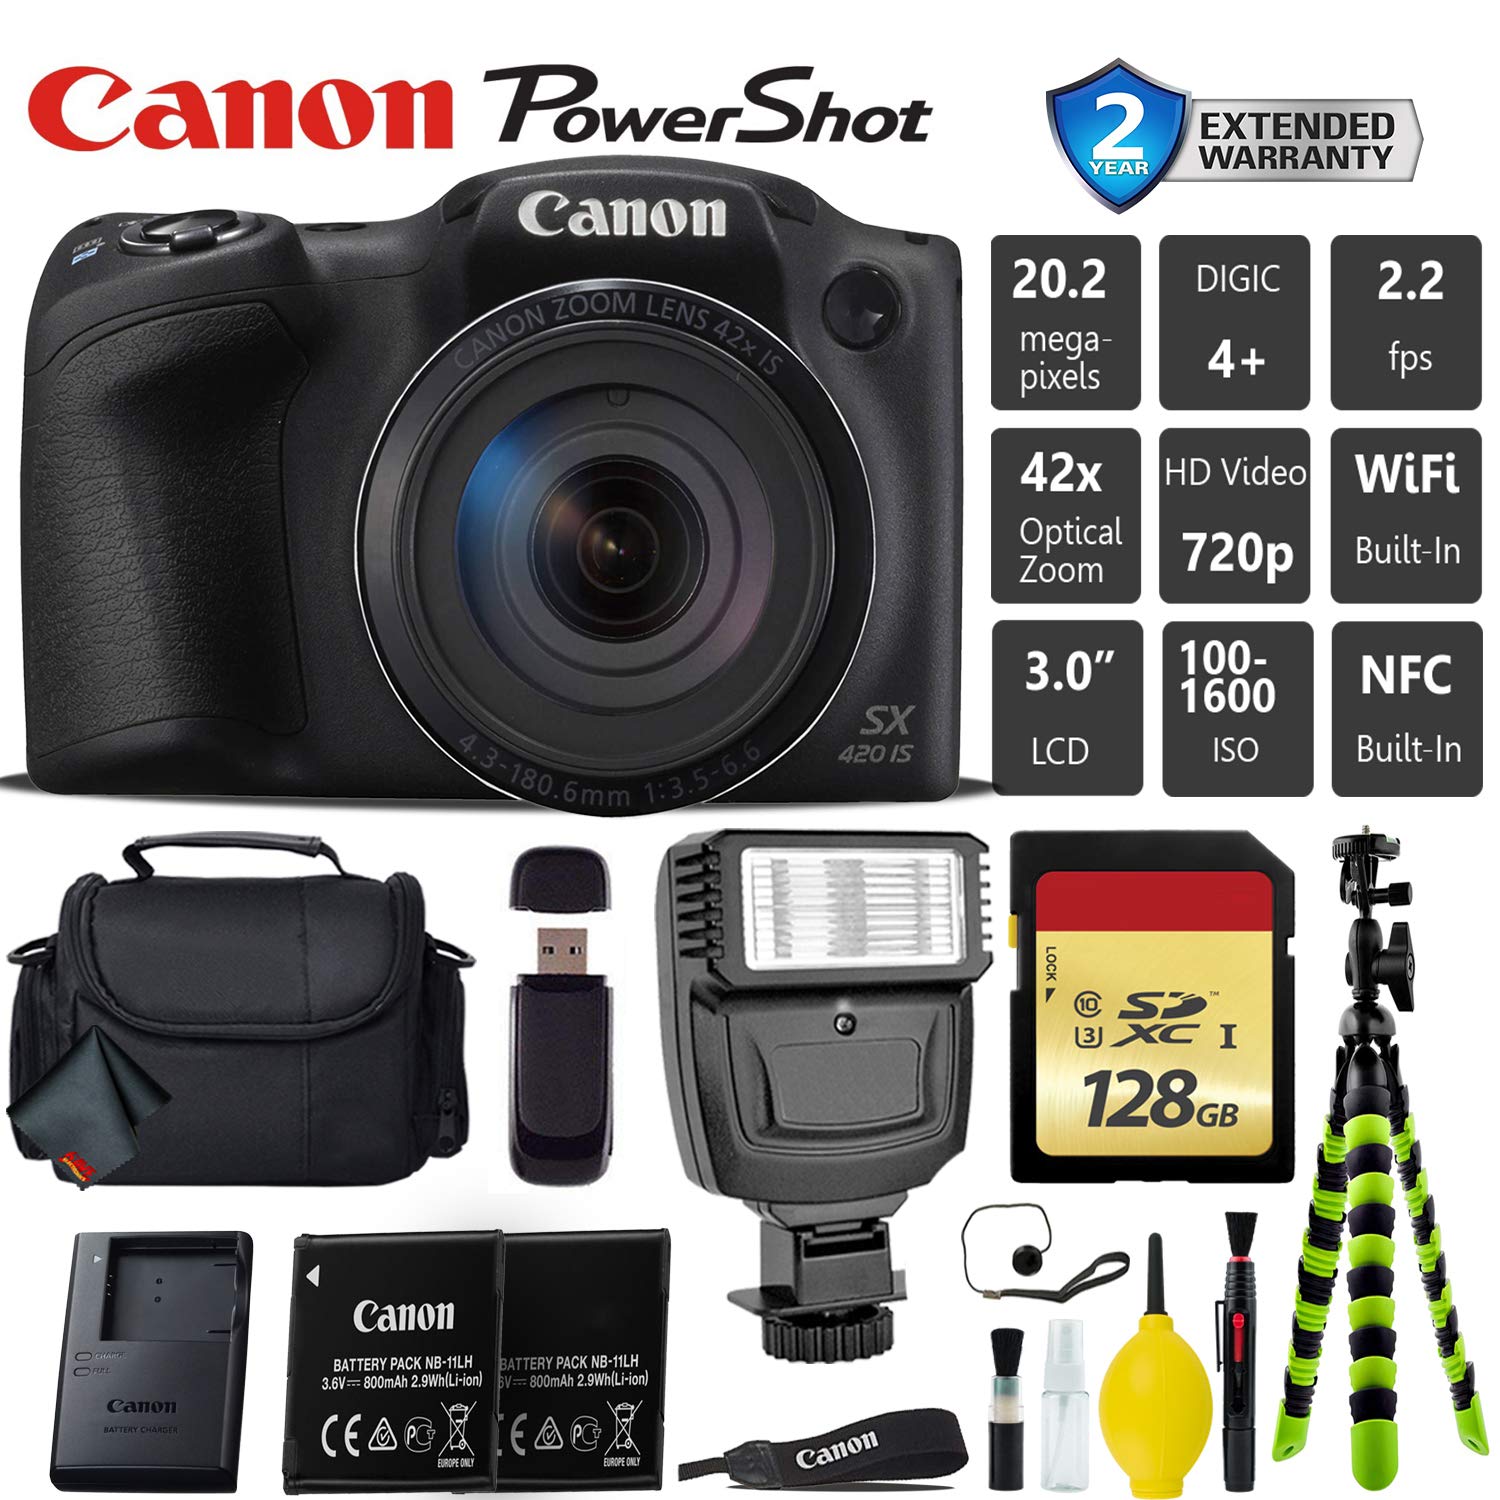 Canon PowerShot SX420 is Digital Point and Shoot Camera + Extra Battery + Digital Flash + Camera Case Deluxe Bundle